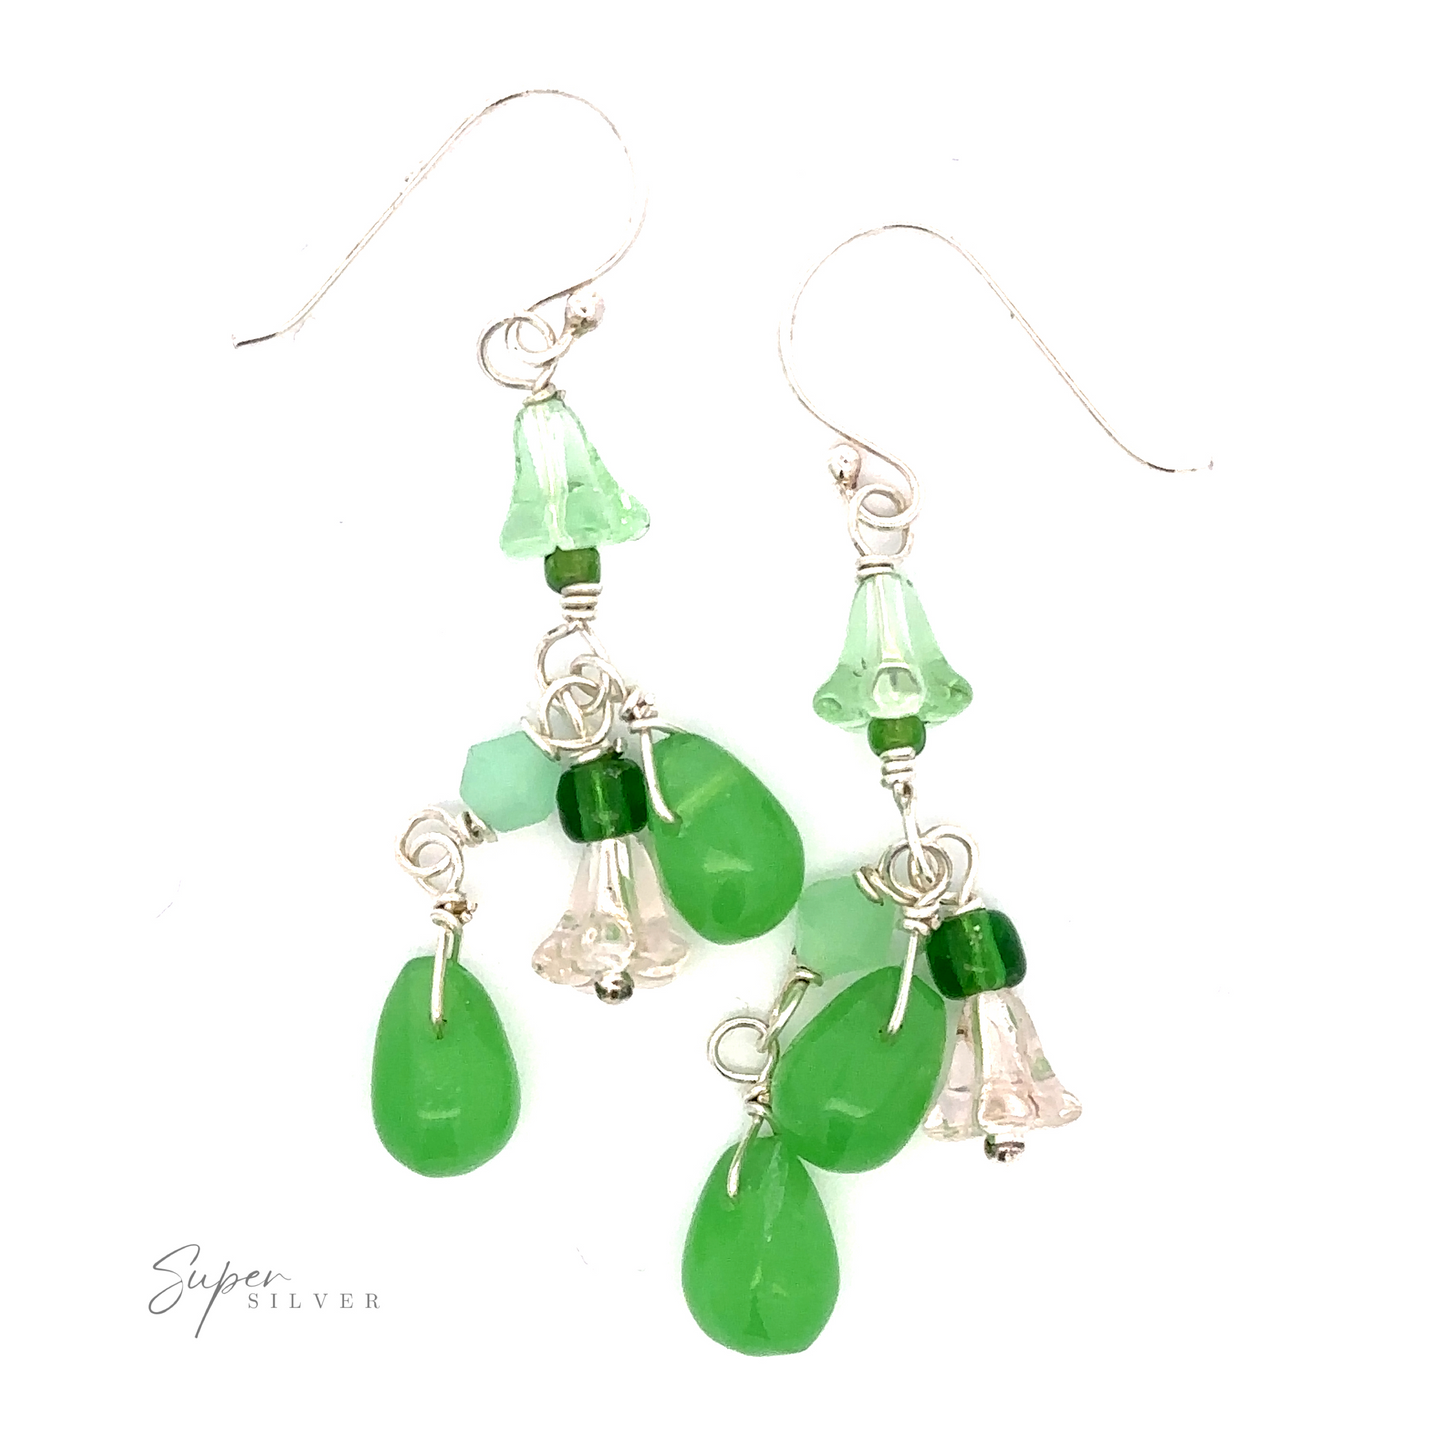 
                  
                    A pair of Playful Green Dangle Earrings featuring glass drops, .925 Sterling Silver wire elements, and translucent floral accents, displayed against a white background. The logo "Super Silver" is in the bottom left corner.
                  
                